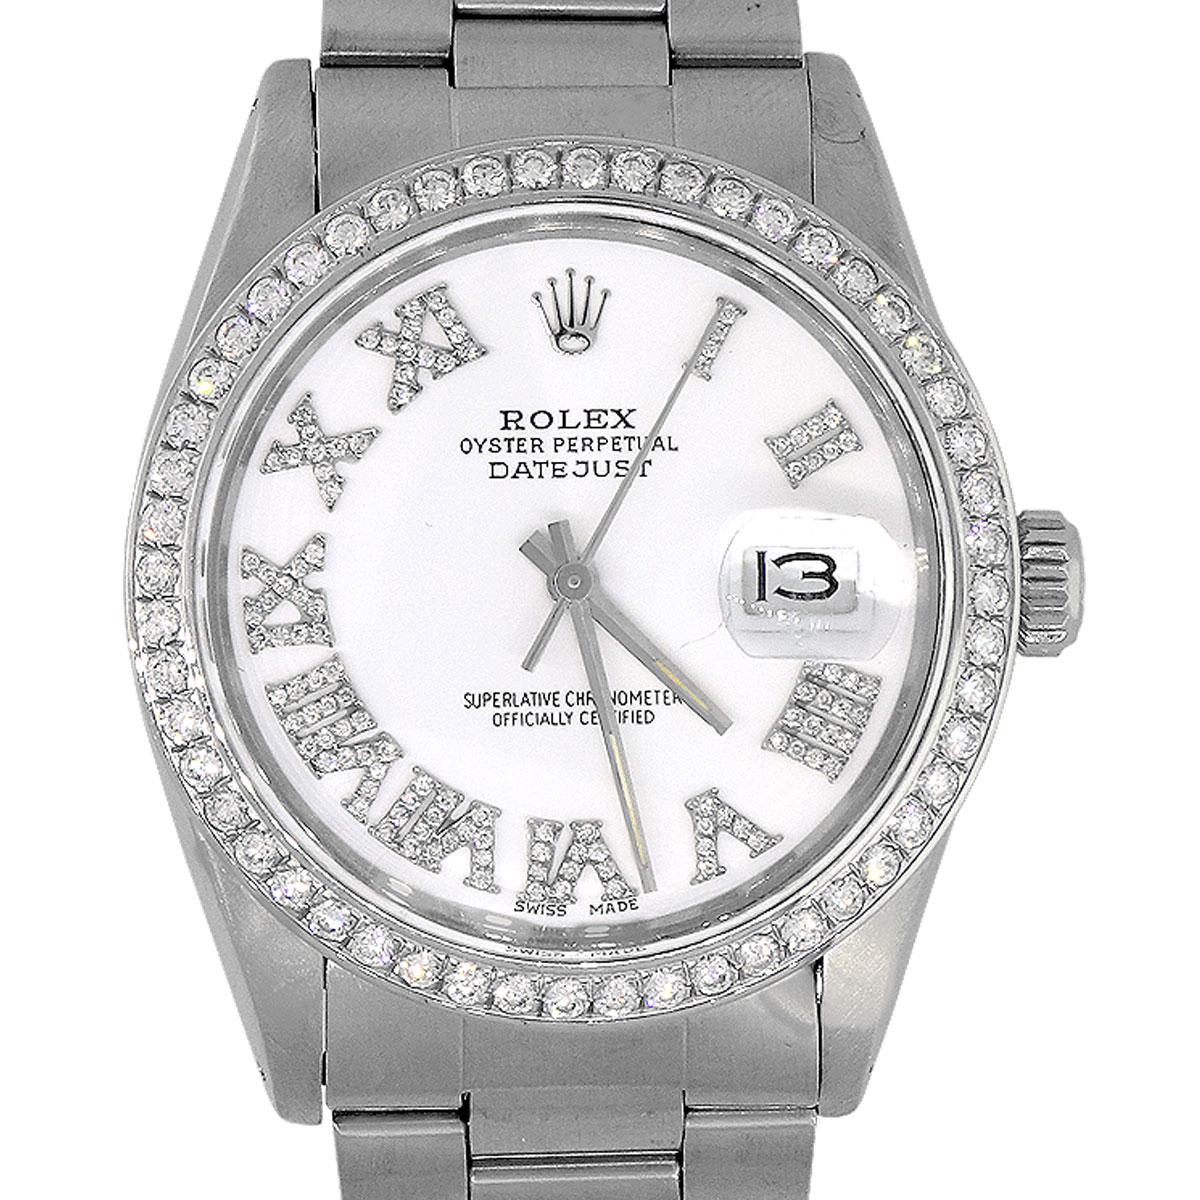 Brand: Rolex
MPN: 16030
Model: Datejust
Case Material: Stainless steel
Case Diameter: 36mm
Crystal: Scratch resistant sapphire
Bezel: Stainless steel Diamond bezel (Aftermarket)
Dial: White roman diamond dial with silver hands